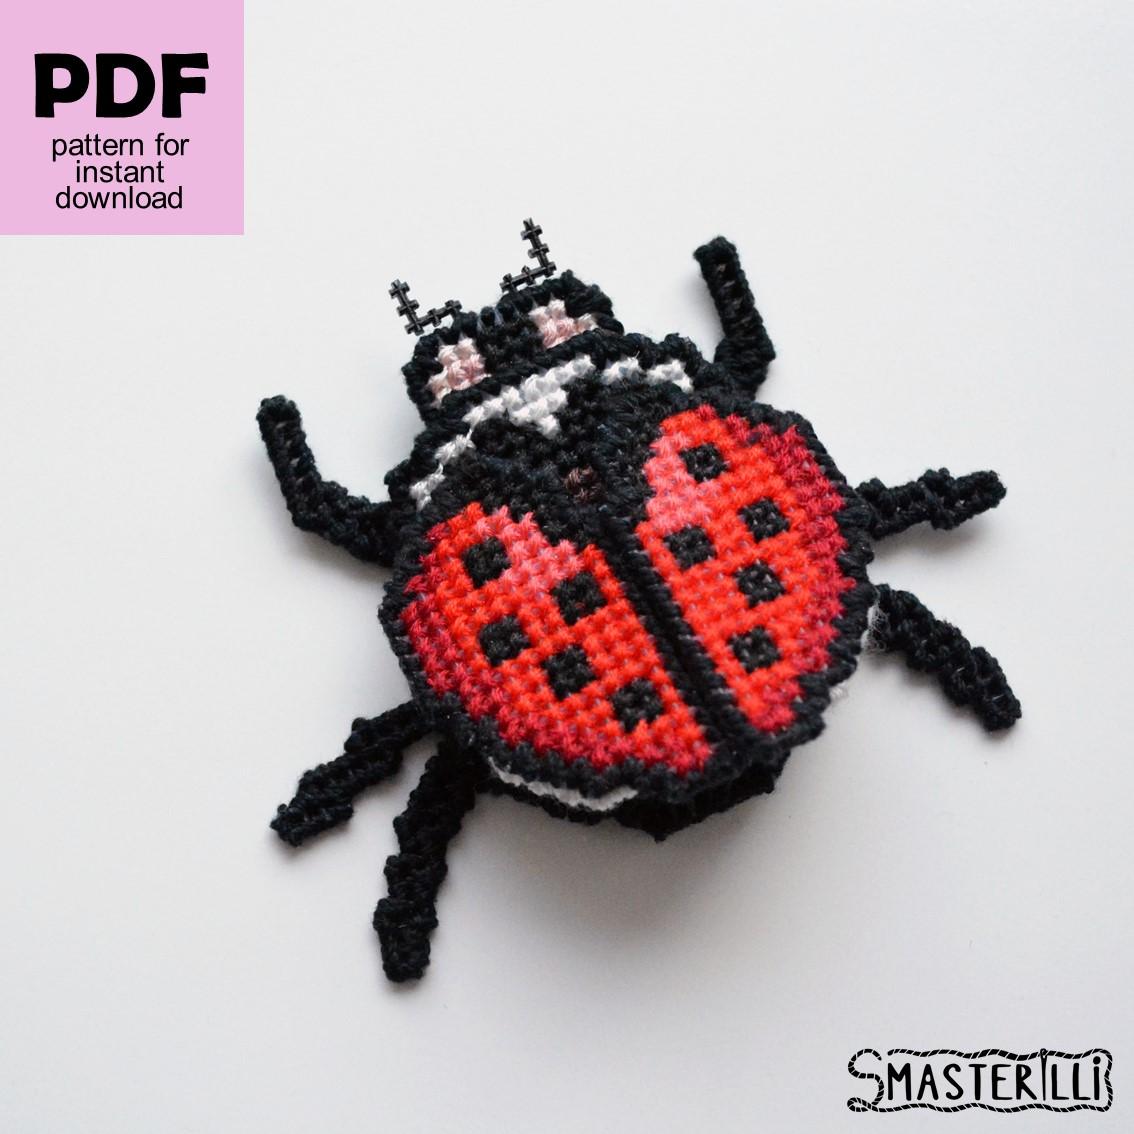 Ladybug cross stitch pattern for plastic canvas PDF , 3D insect with wings pattern and tutorial by Smasterilli. Digital cross stitch pattern for instant download. Plastic Canvas Project